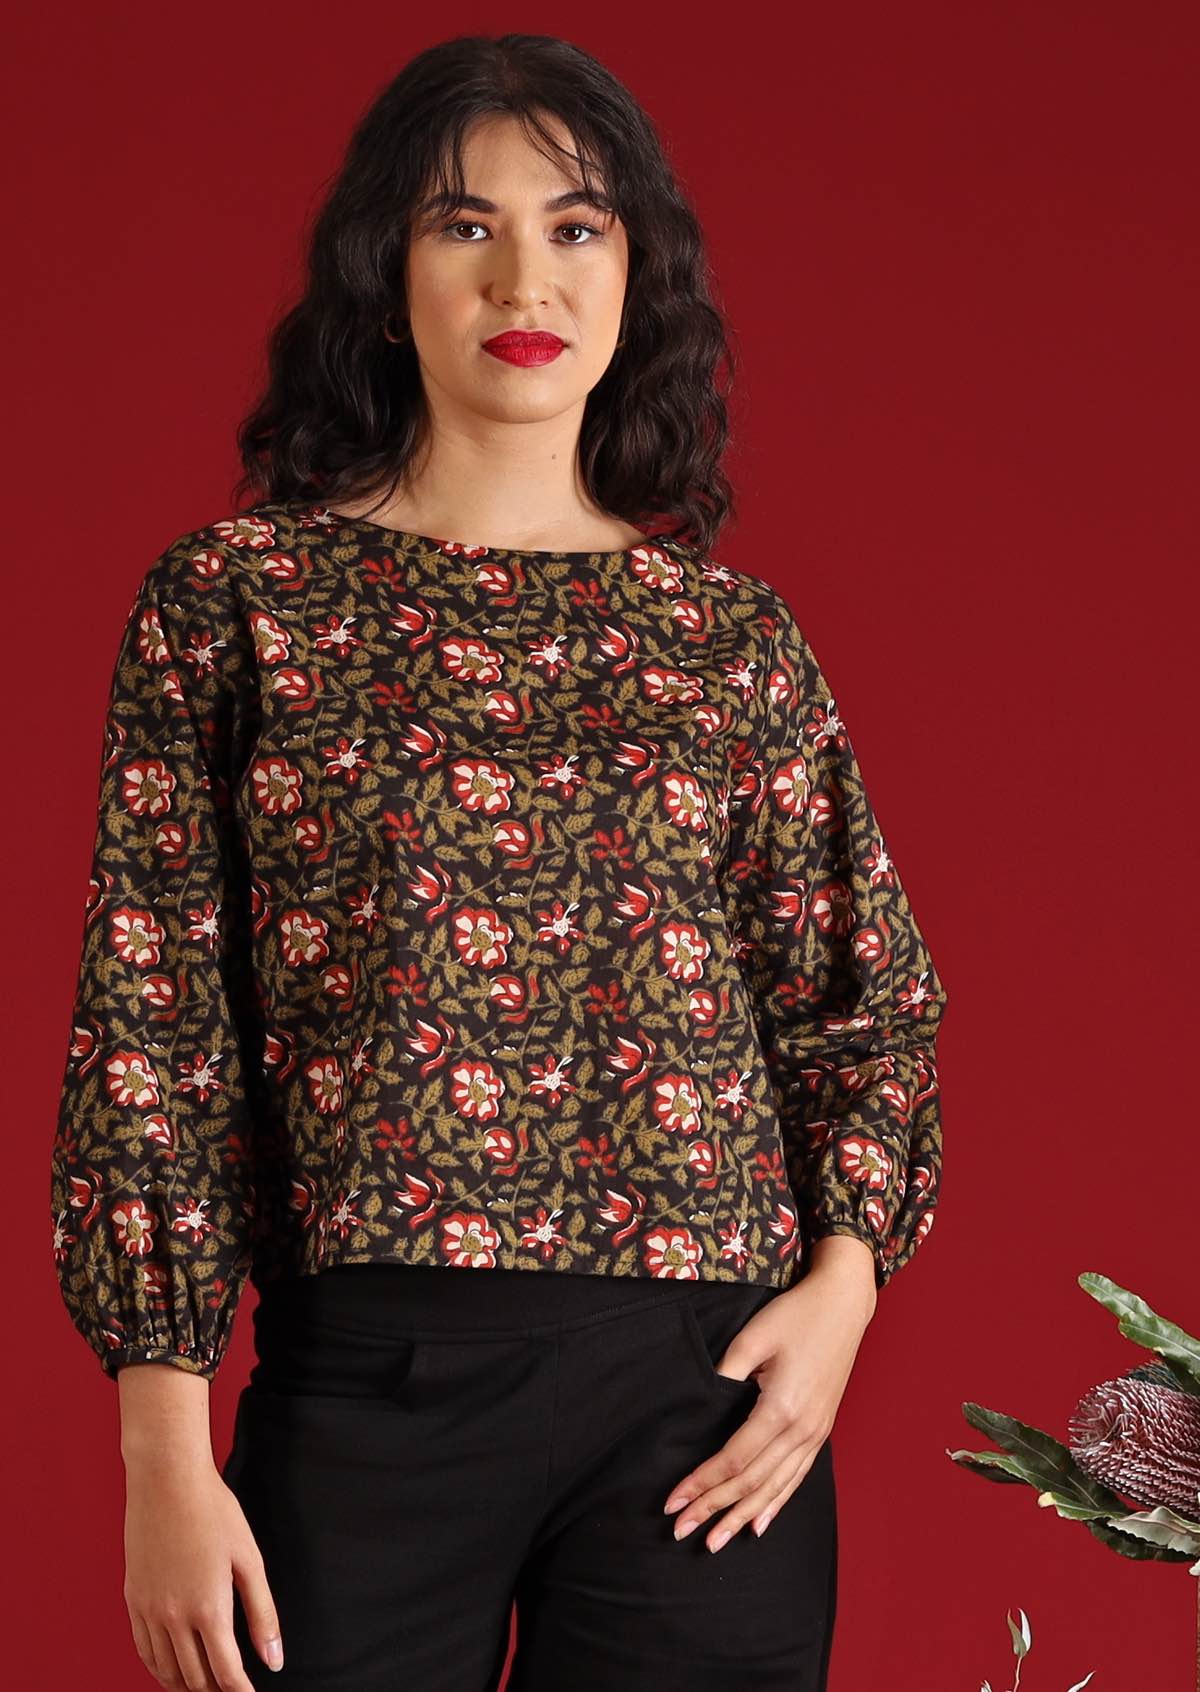 Model with dark hair and  in Isla Top Wild Rose black floral cotton boho top